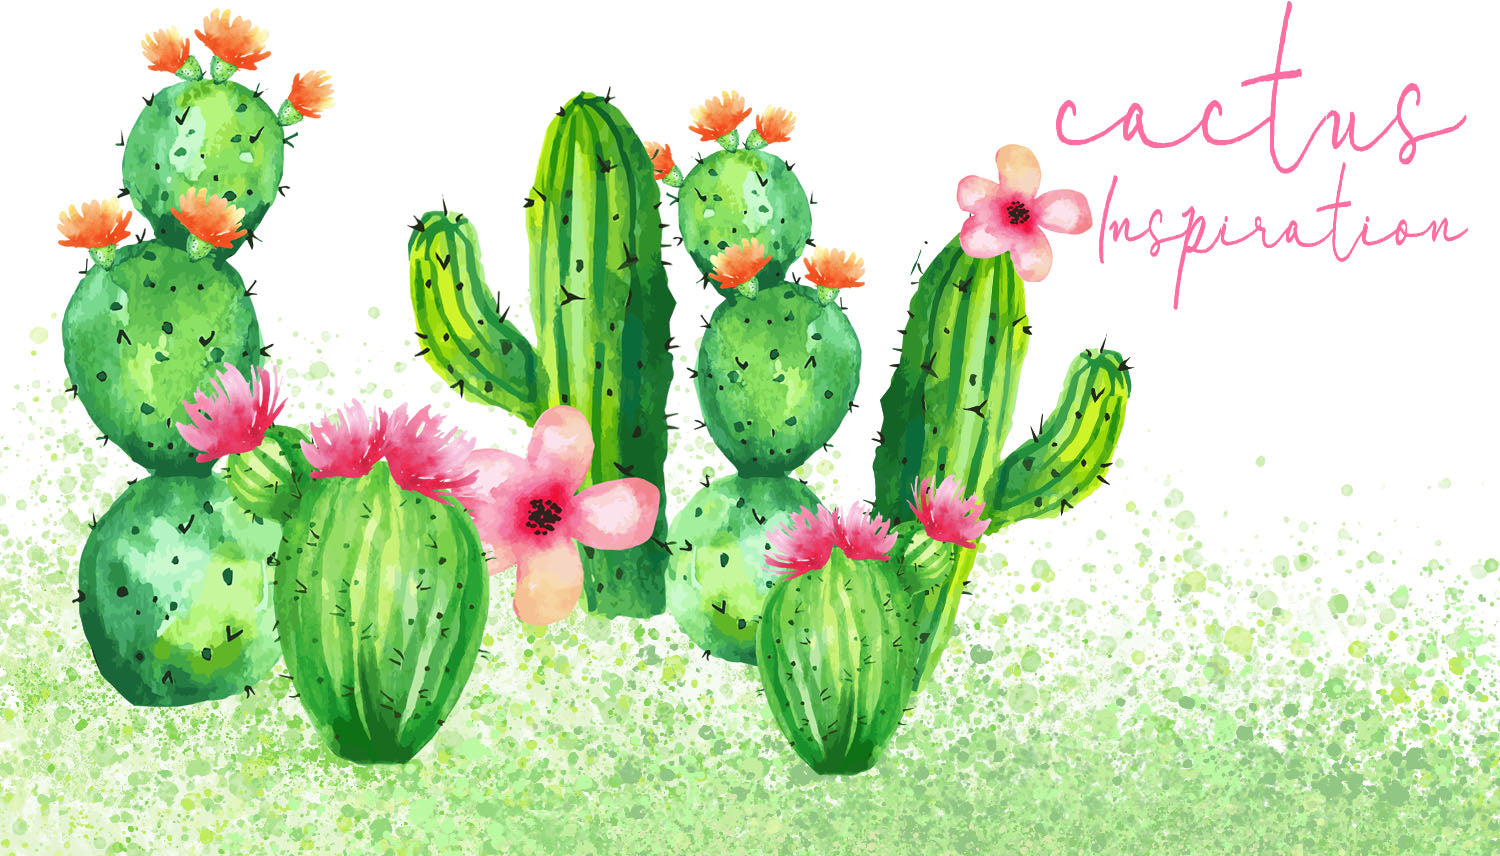 Beaded Cactus Inspiration and Tutorial